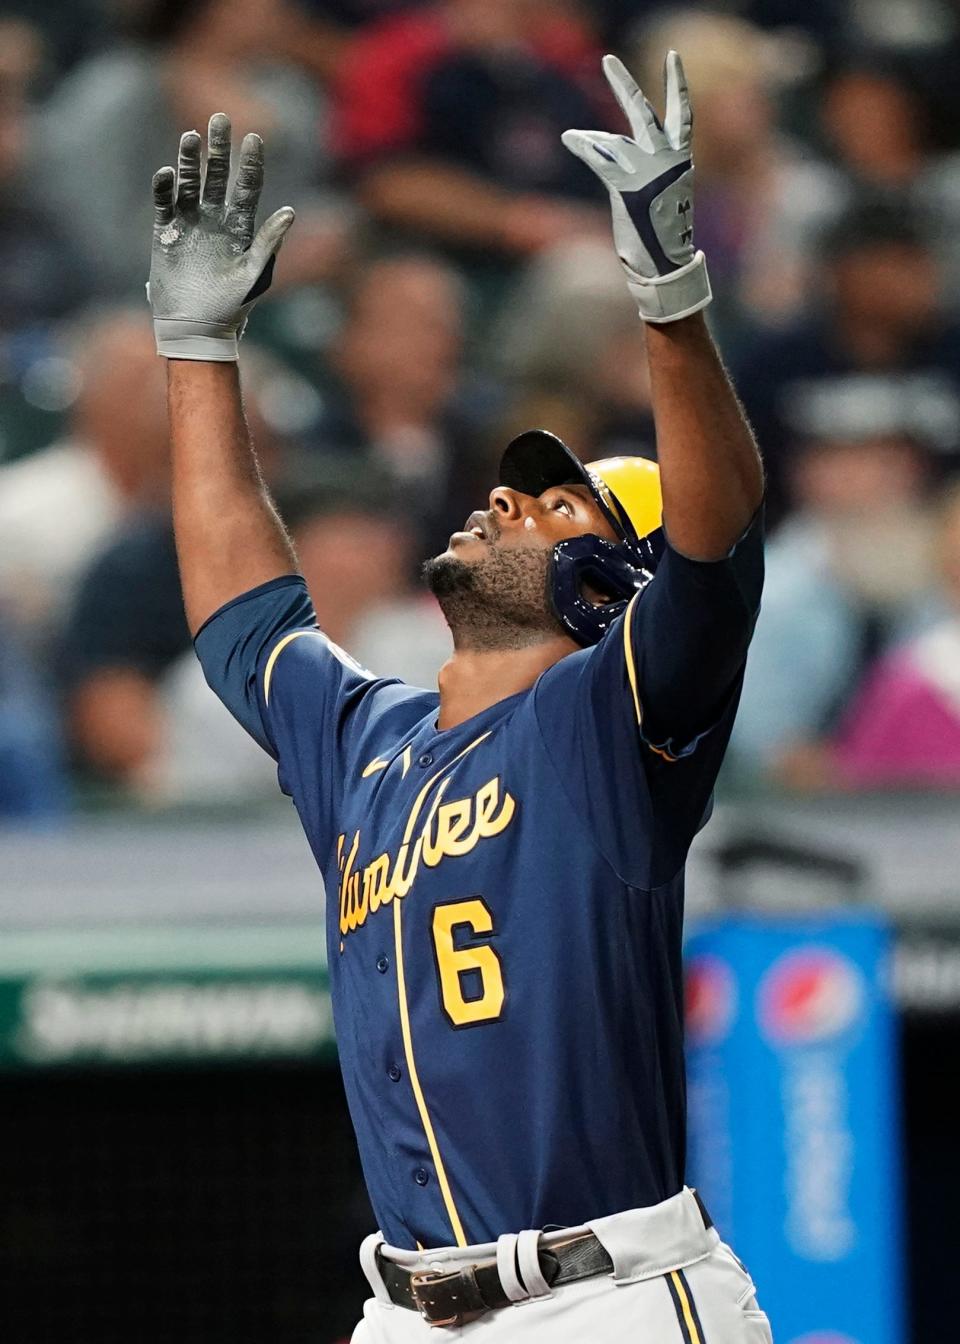 Milwaukee Brewers' Lorenzo Cain celebrates a grand slam during a game last season. Cain's offensive production dropped significantly in 2022 following an injury-plagued 2021. The Brewers designated him for assignment on Saturday, ending his second stint with the club that drafted him in 2004.